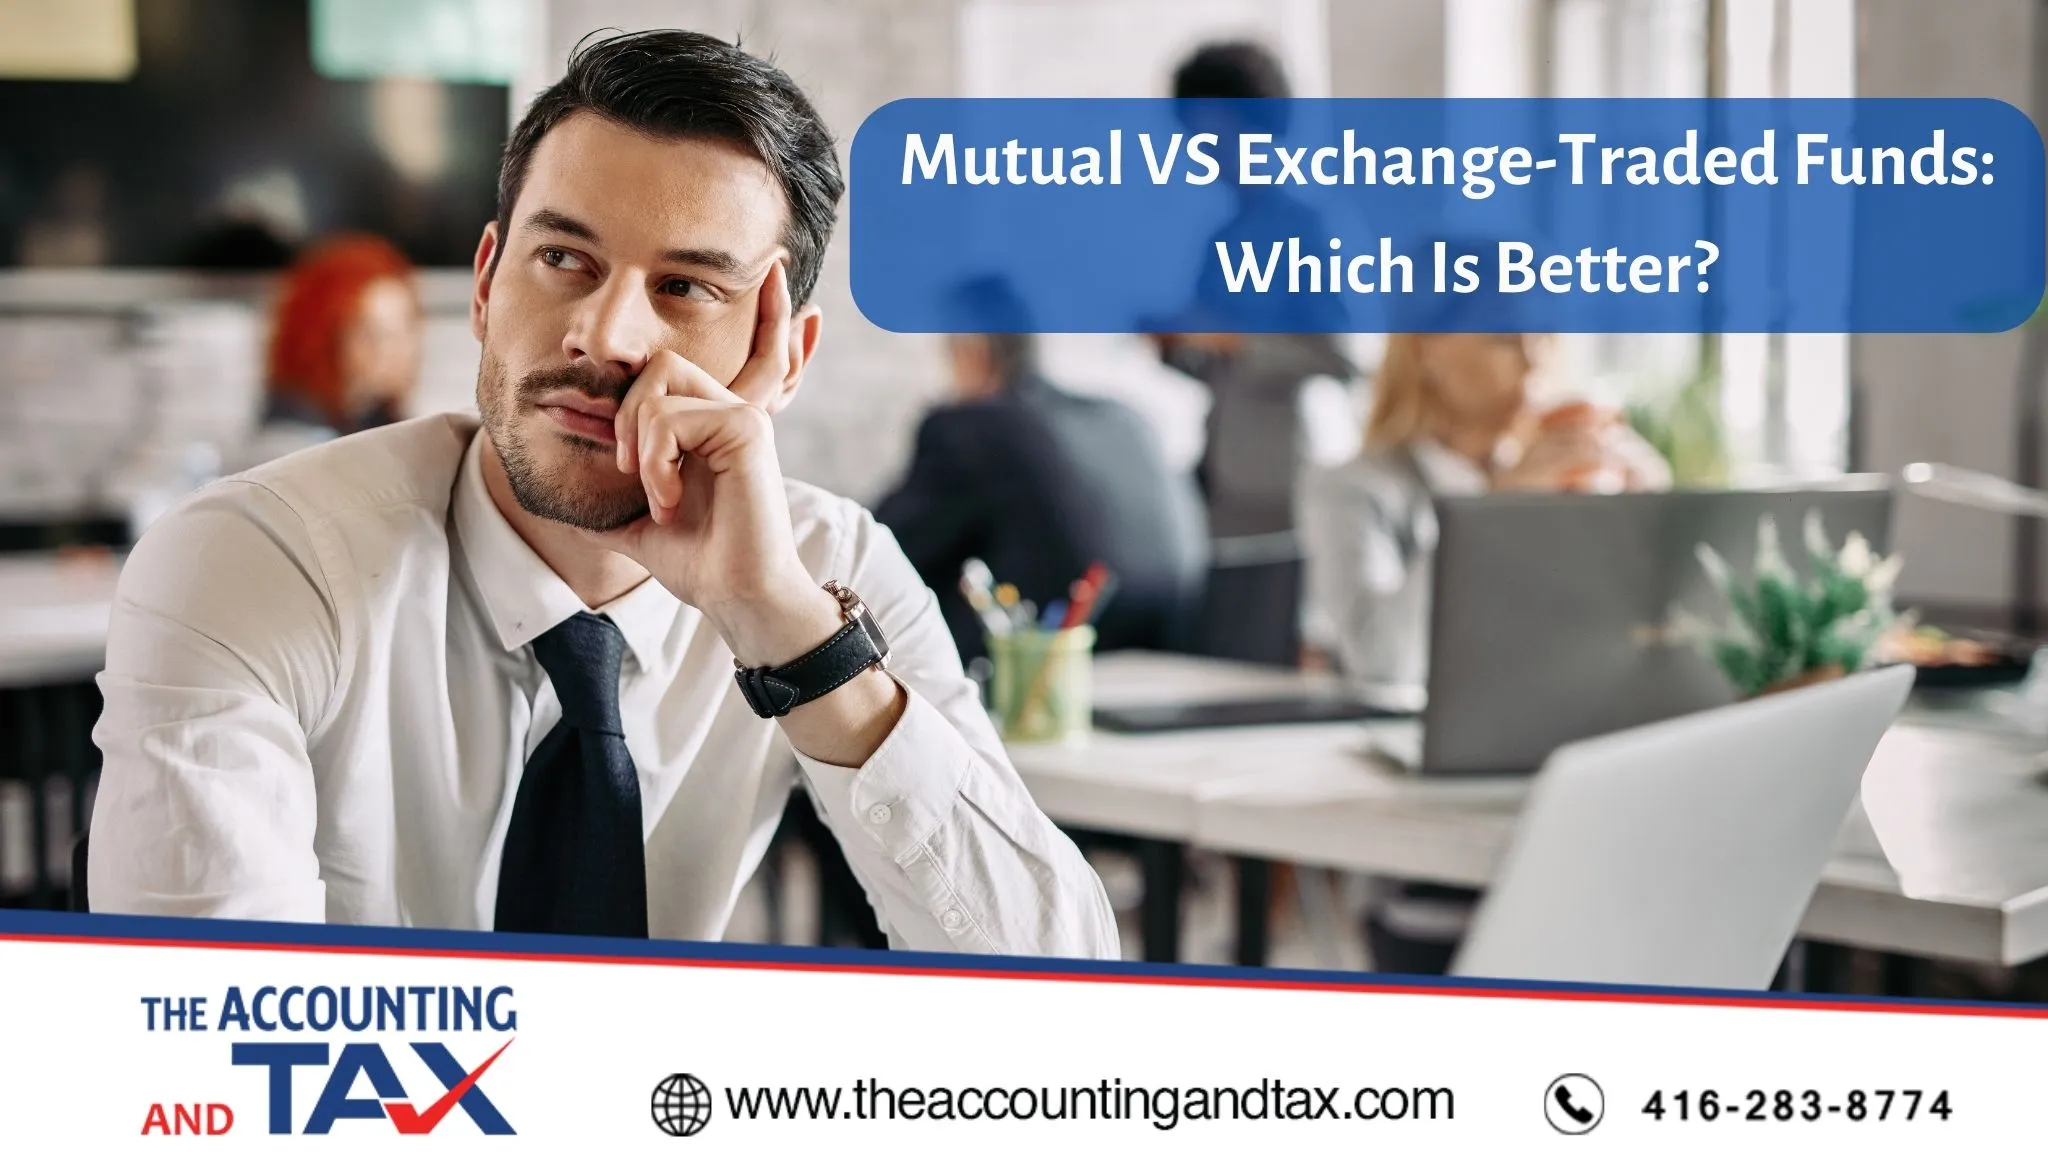 Mutual VS Exchange-Traded Funds